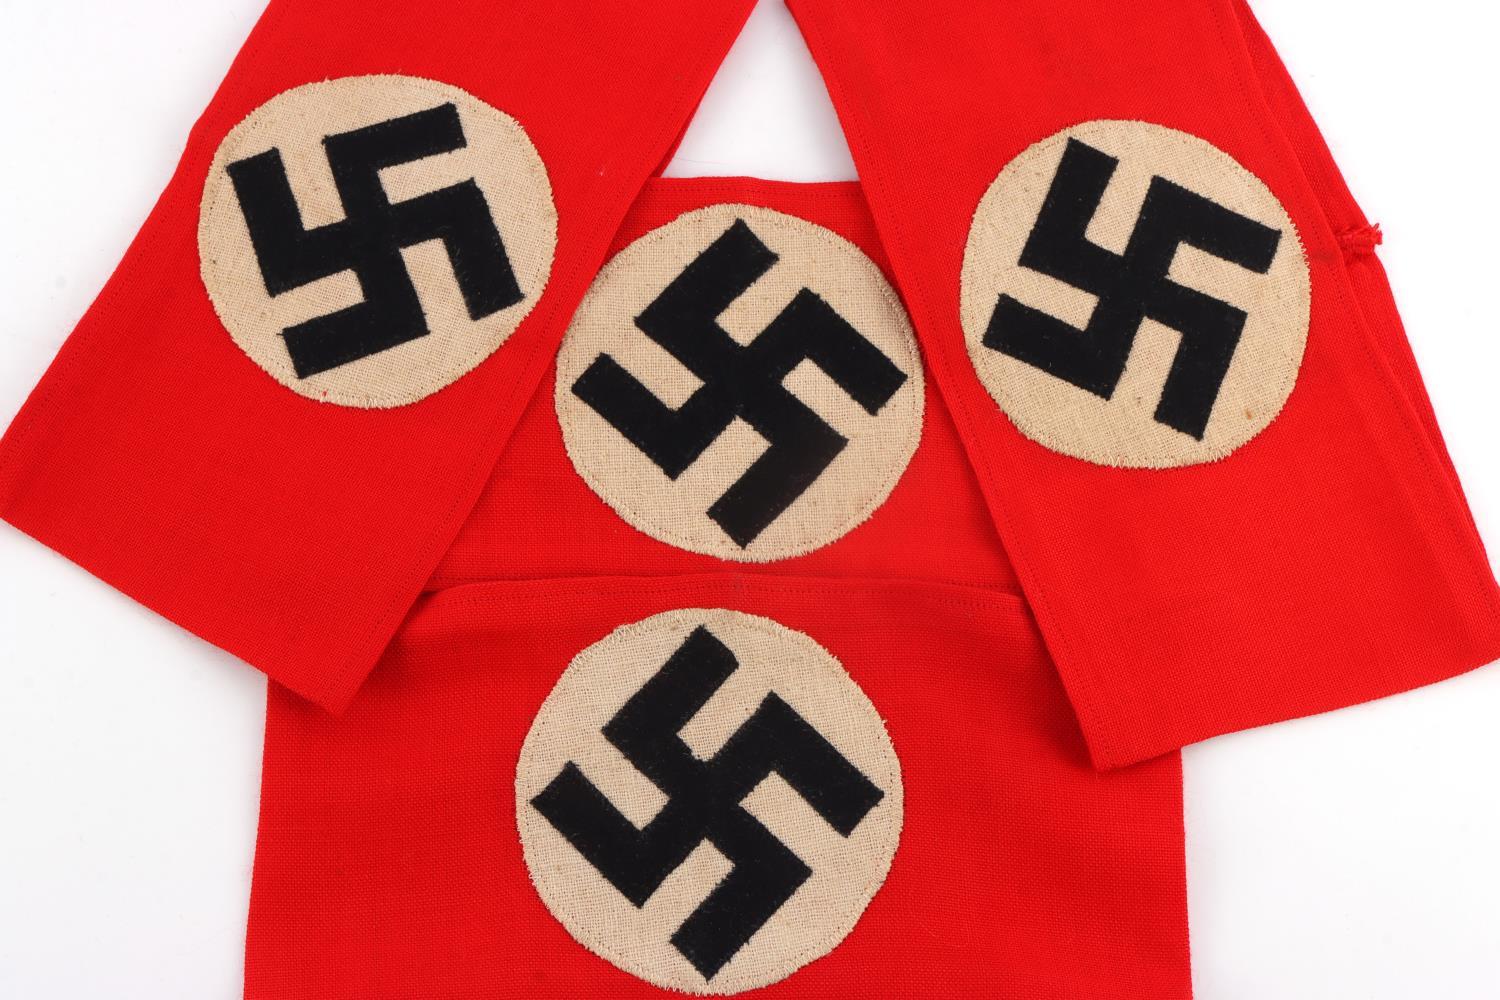 WWII GERMAN THIRD REICH NSDAP AMRBAND LOT OF 4